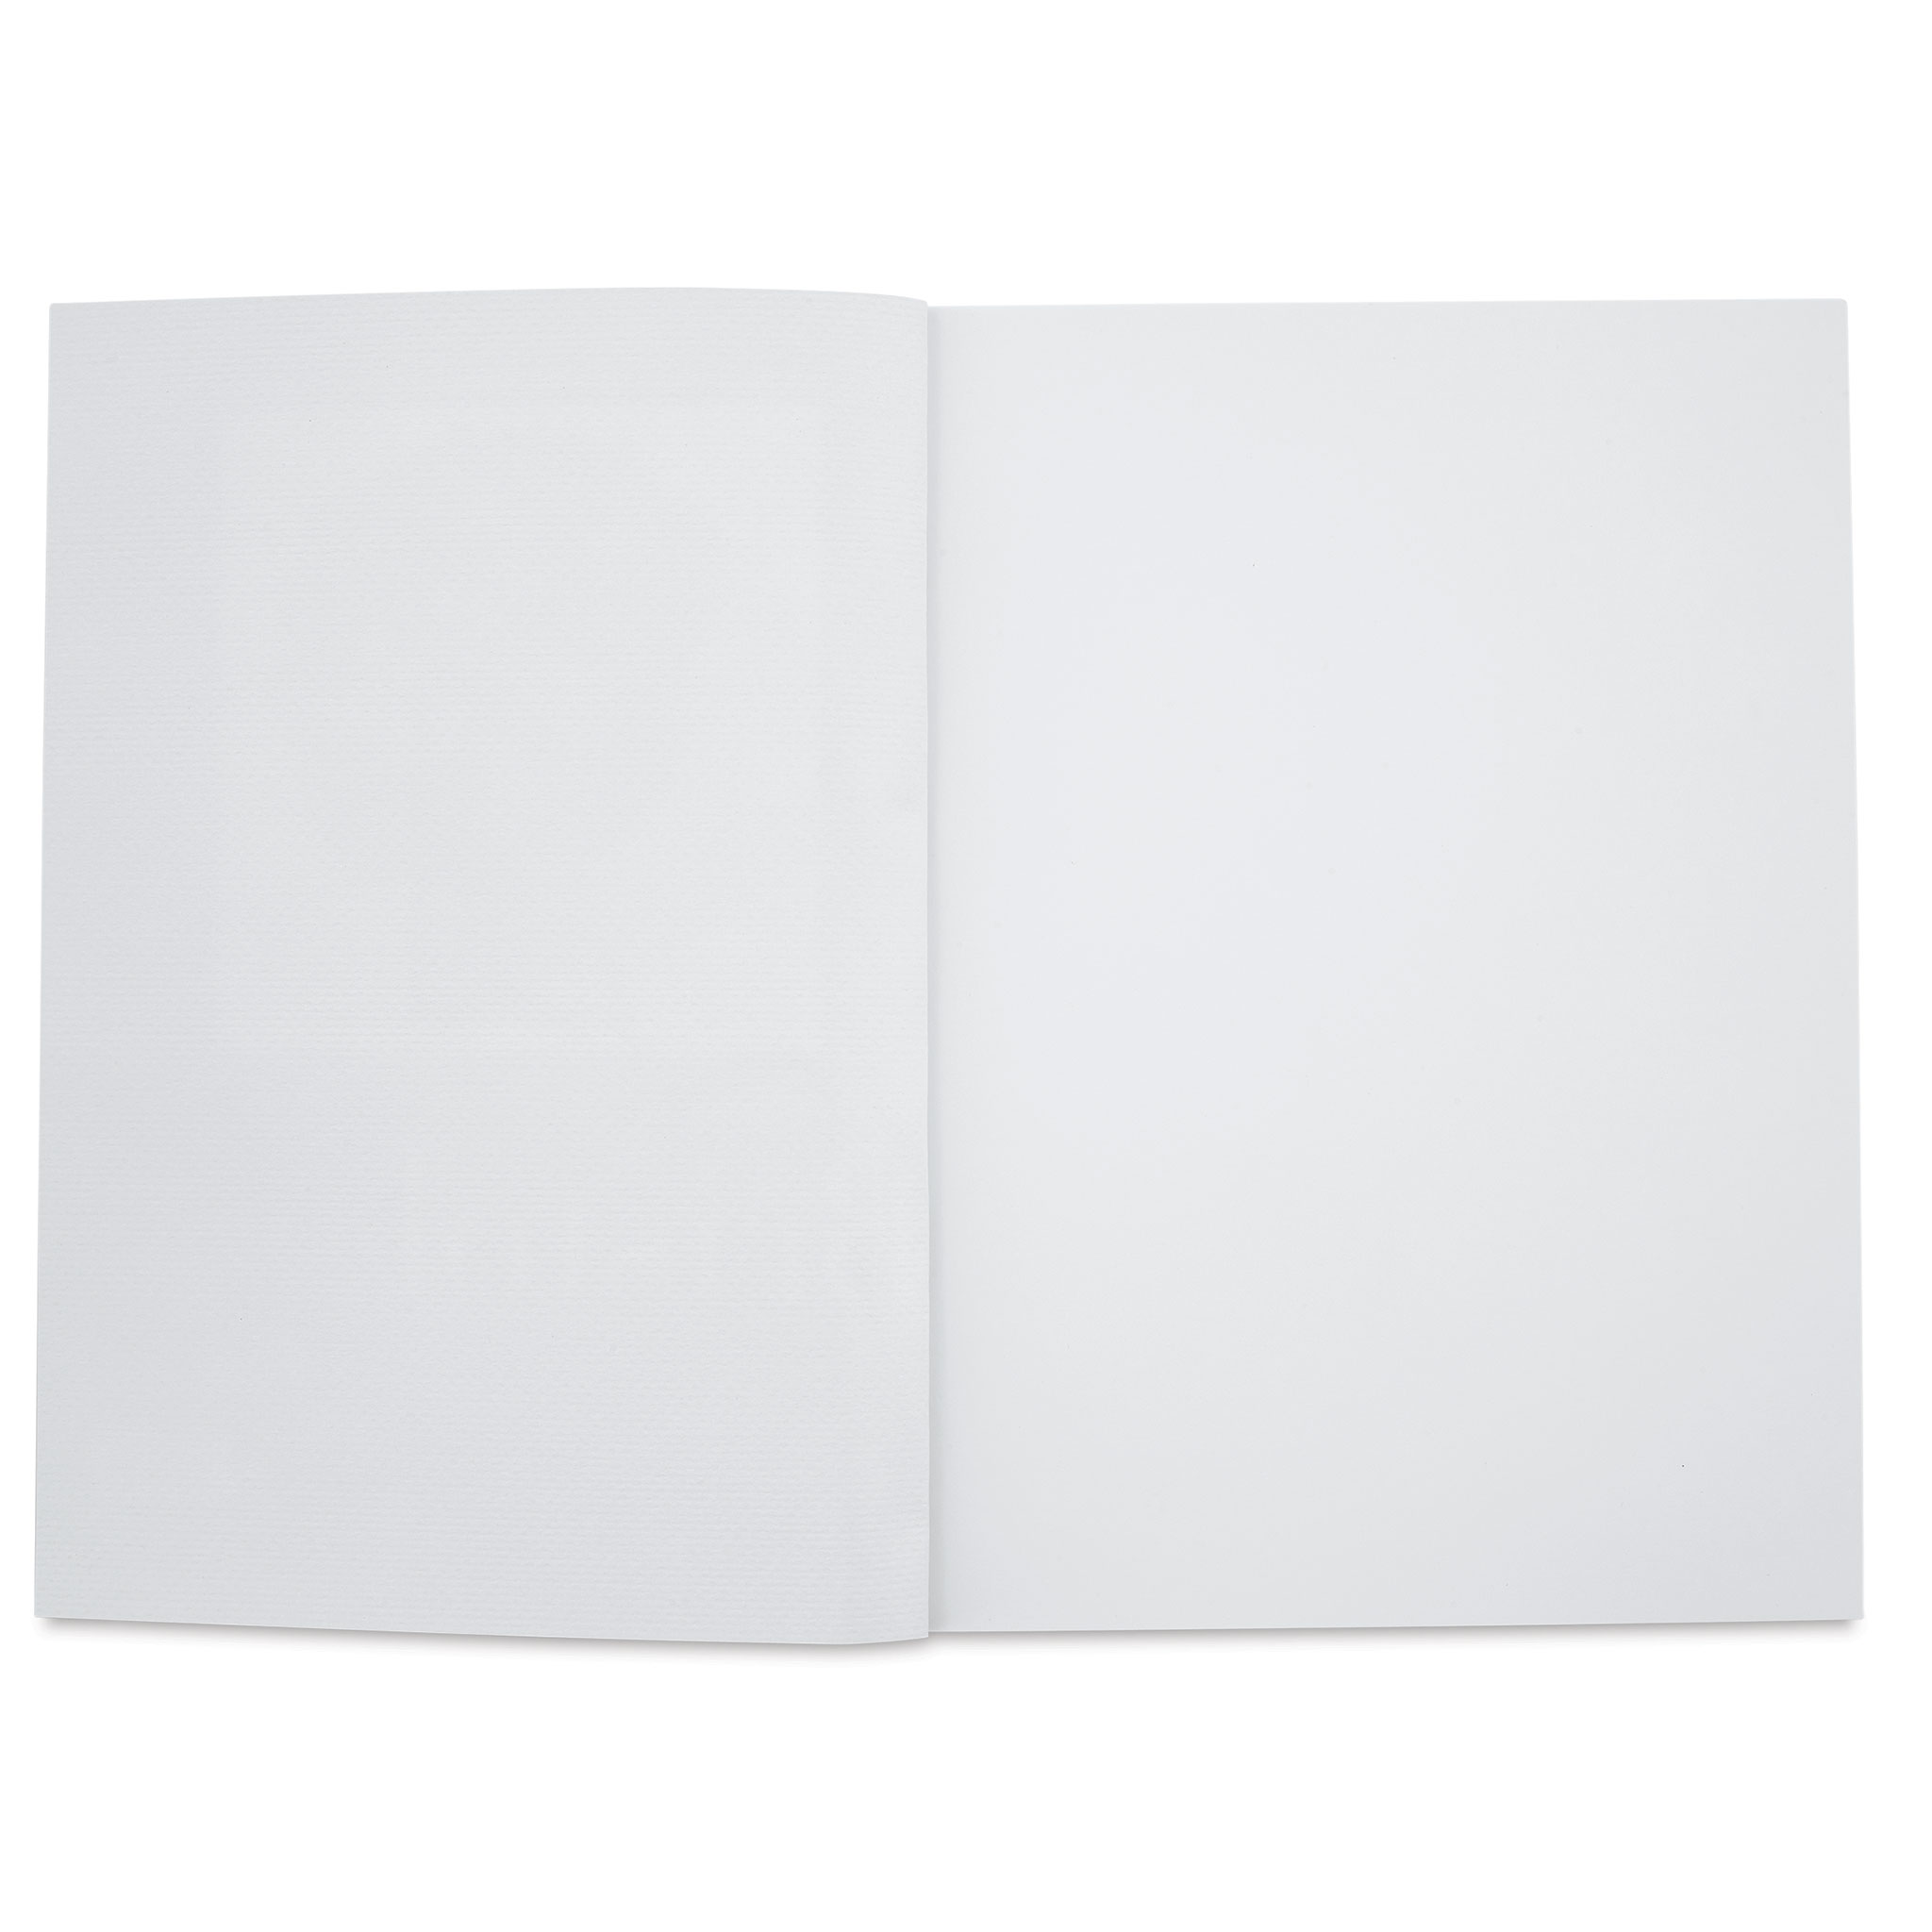 Strathmore 400 Series Bristol Paper Pad, Smooth 11 x 14  — Midwest  Airbrush Supply Co